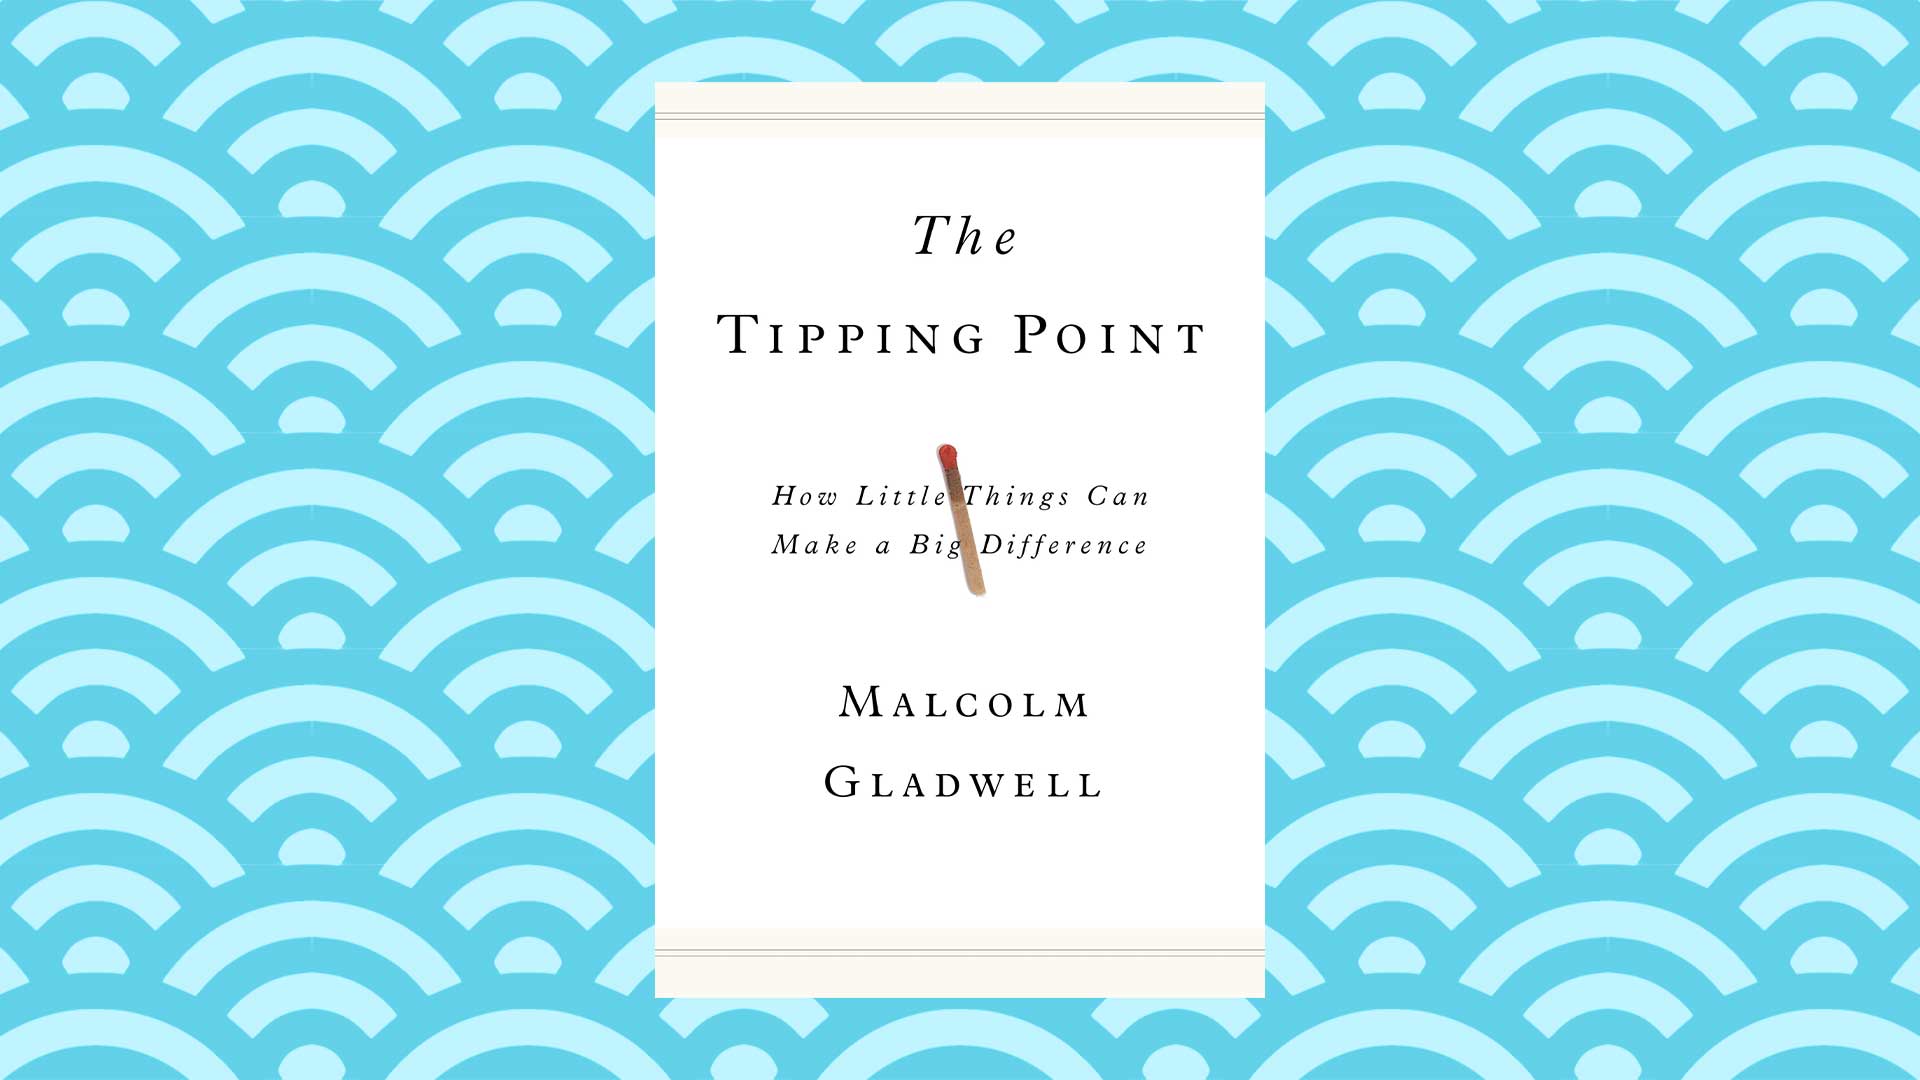 Book of the Month: “Tipping Point” by Malcom Gladwell